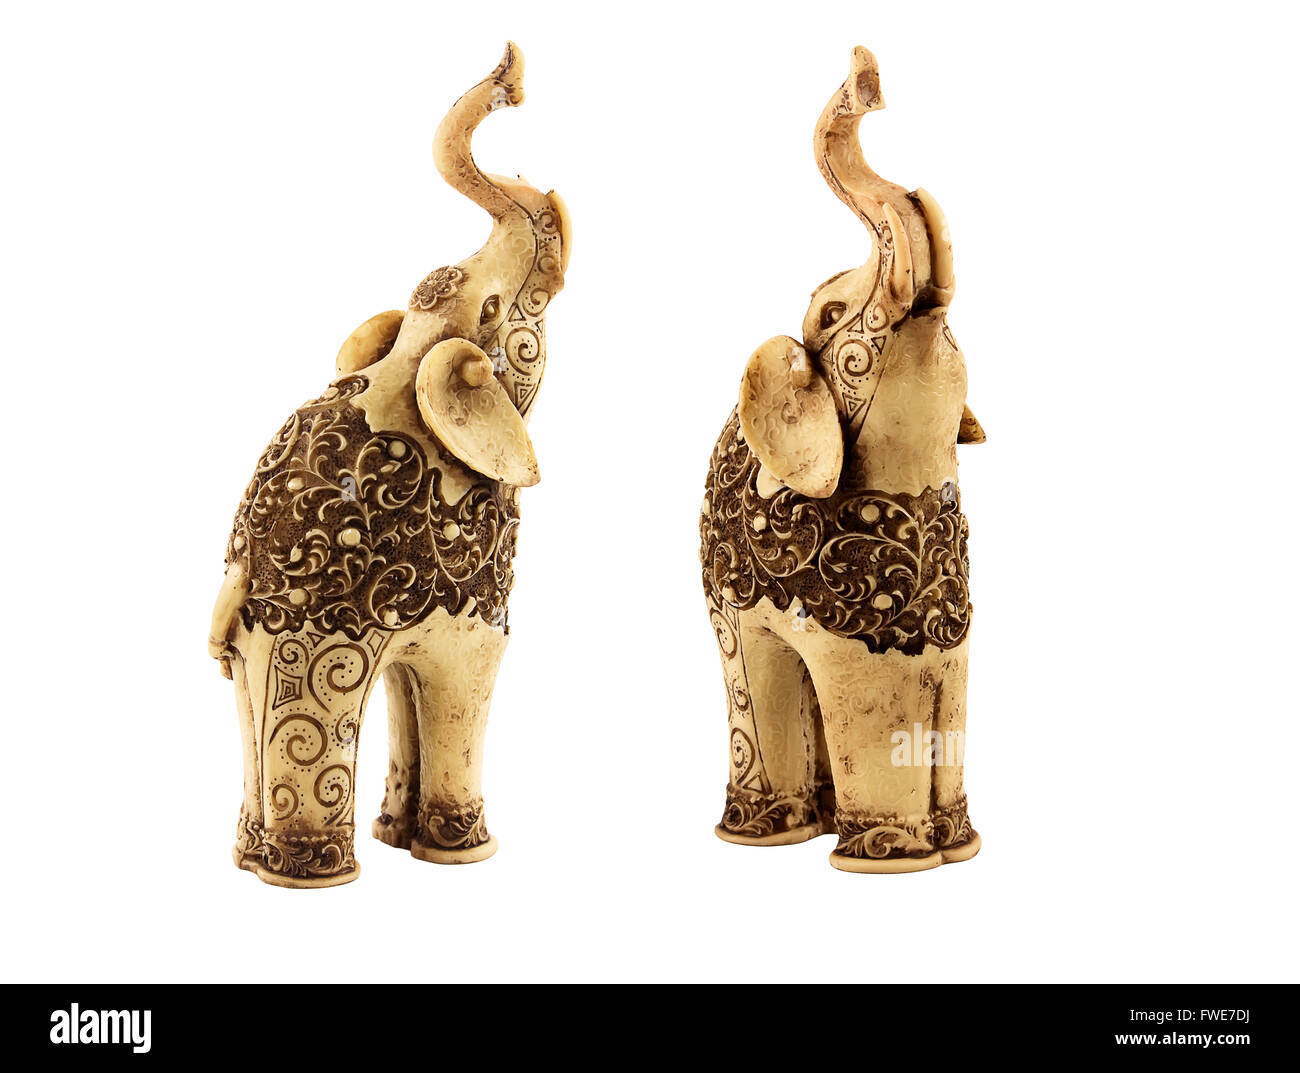 Two carved statuettes of indian elephants  with beautiful ornate pattern. One elephant looks almost in front, another slightly b Stock Photo